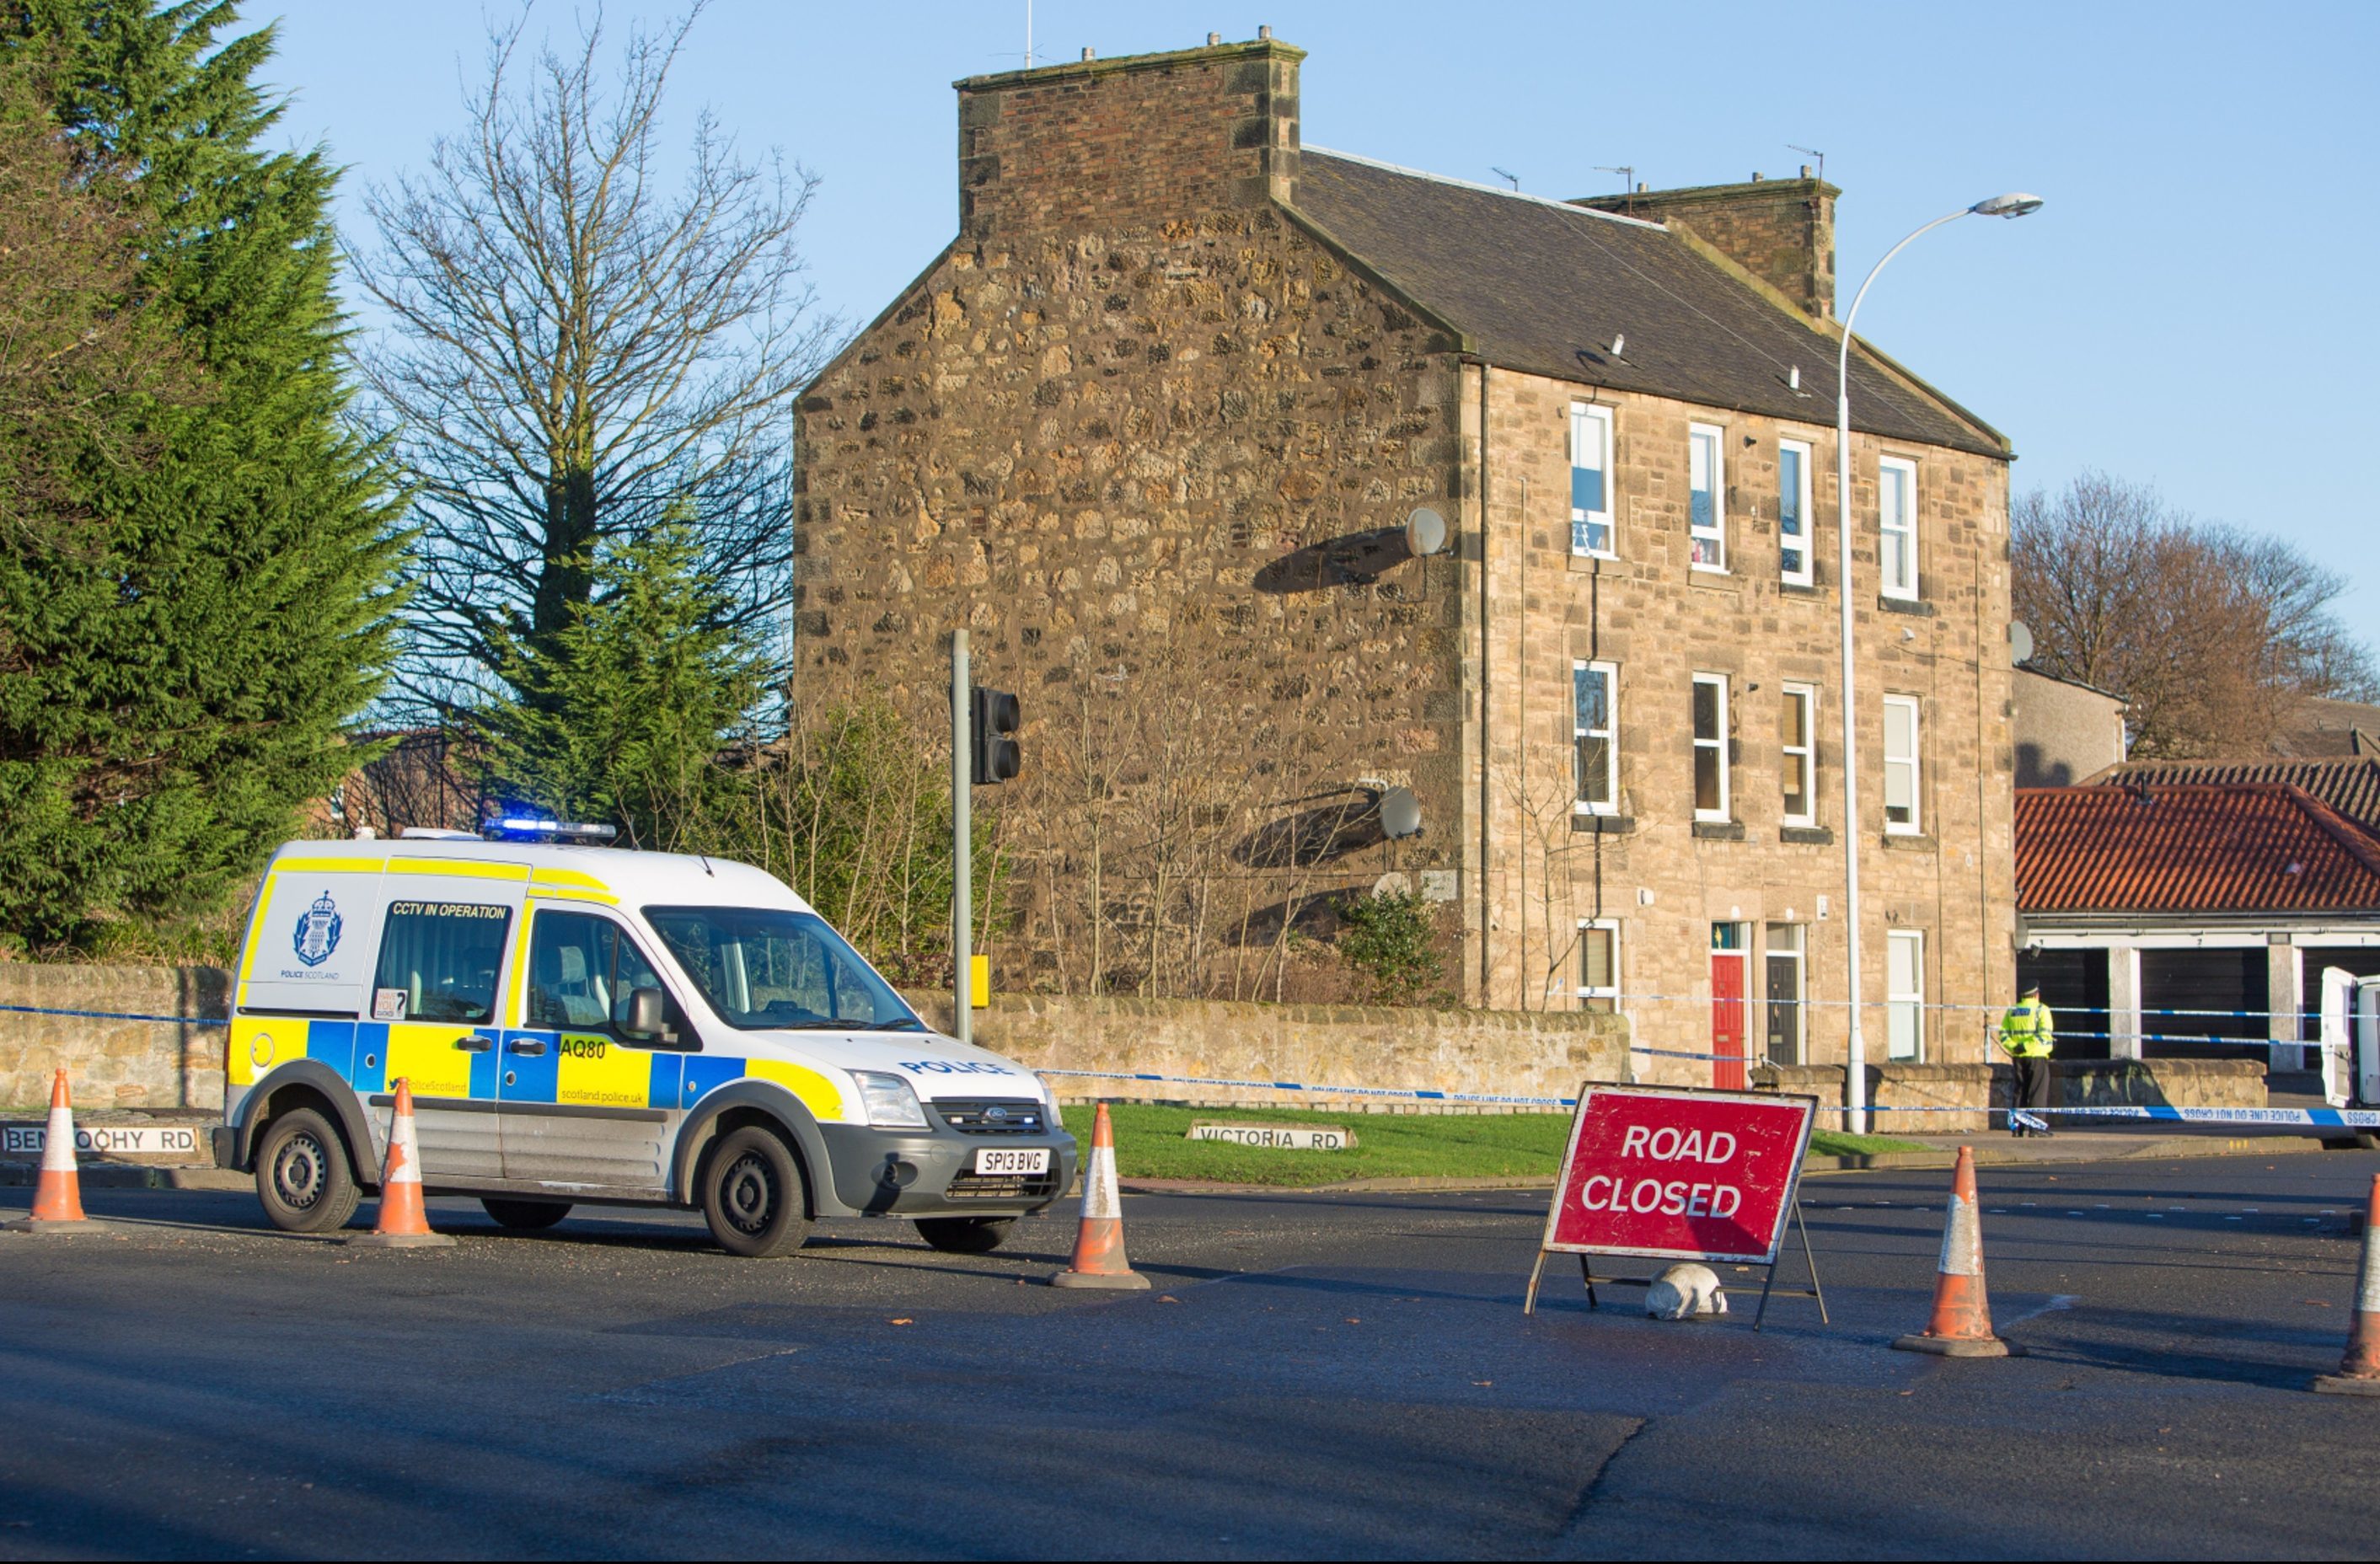 Police in attendance at the incident on Kirkcaldy's Victoria Road near to the train station.